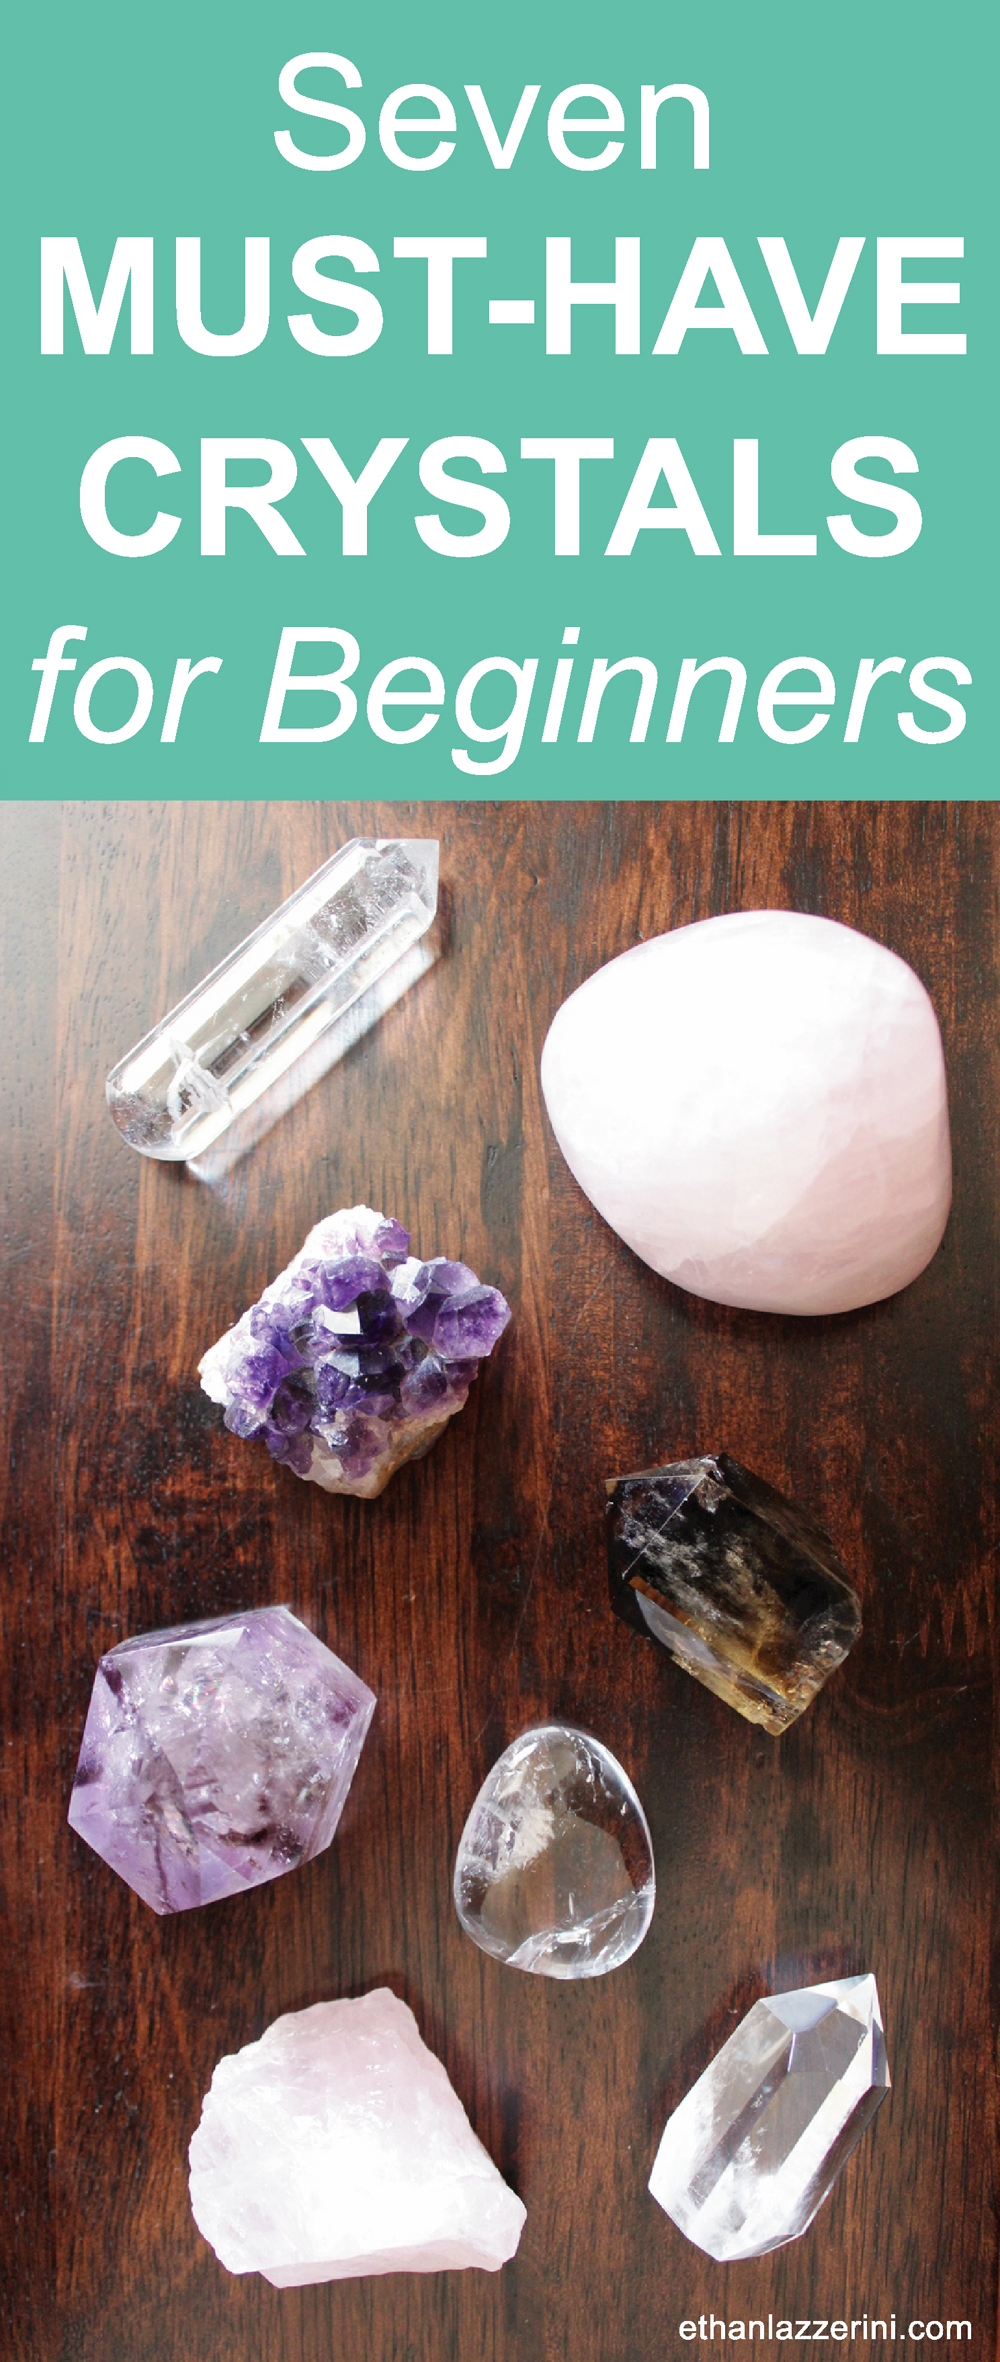 Crystals For Beginners: Begin your Crystal Healing journey with these Must-Have crystals. Seven essential crystals nobody should be without!